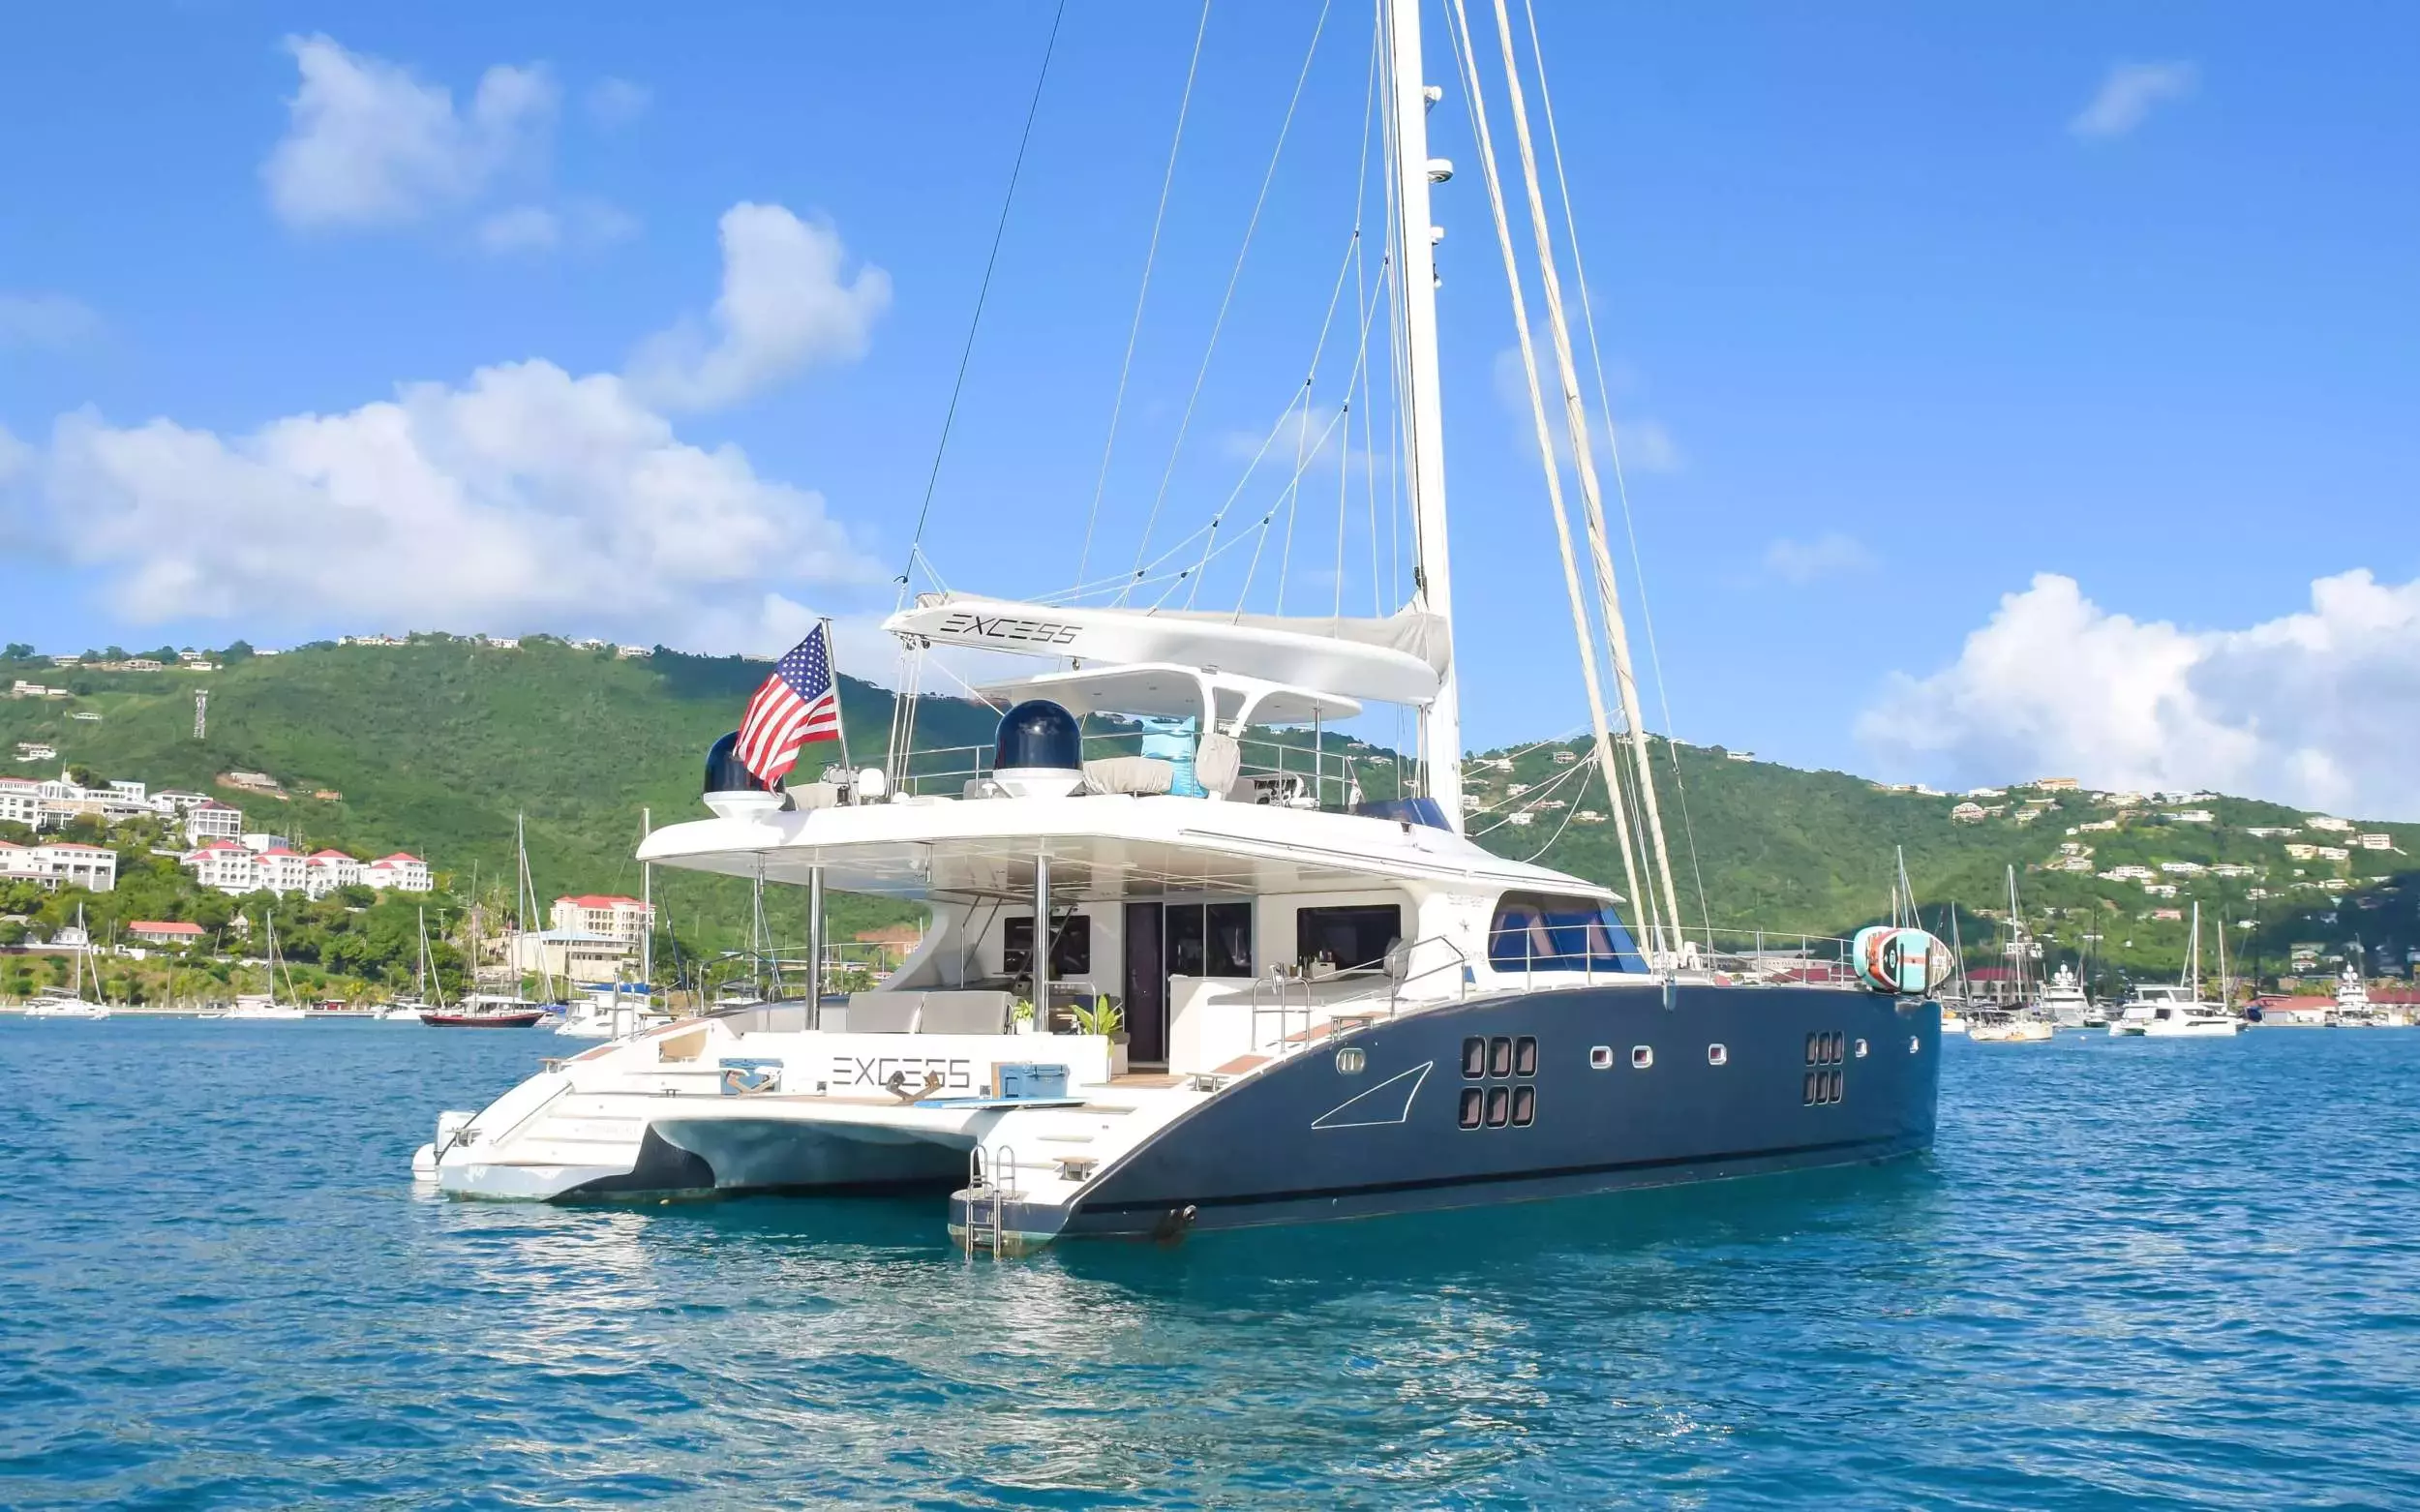 Excess by Sunreef Yachts - Special Offer for a private Luxury Catamaran Rental in Virgin Gorda with a crew